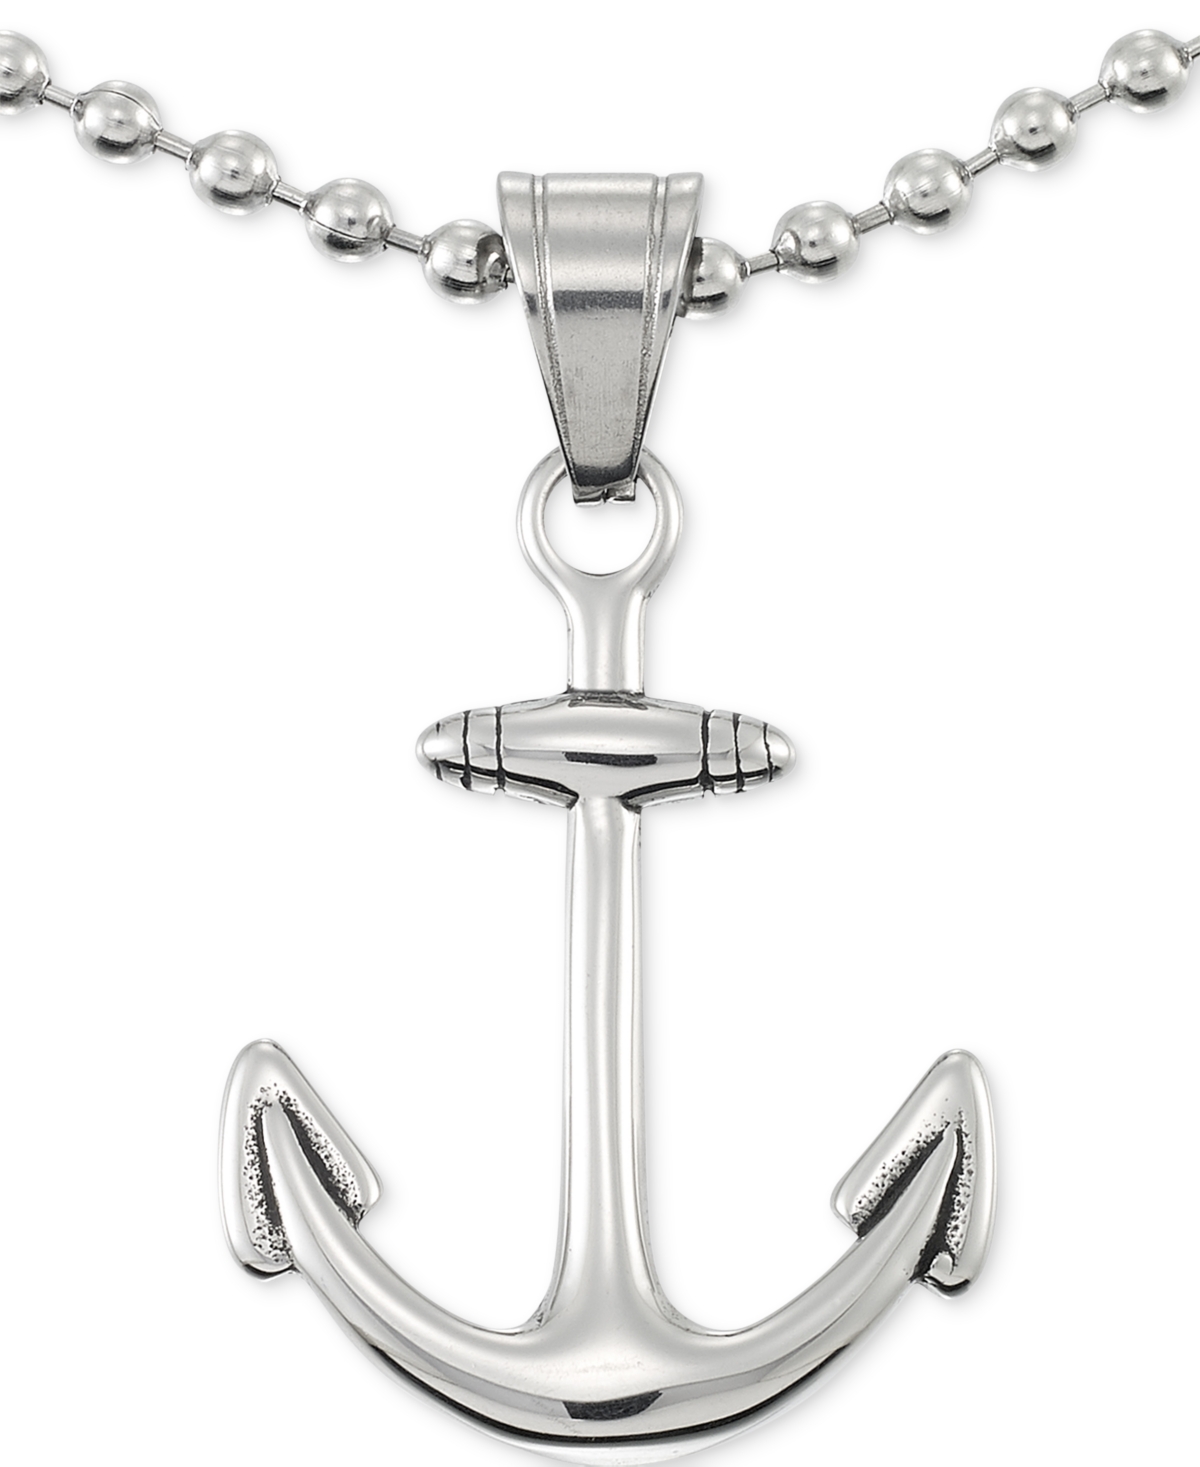 Legacy for Men by Simone I. Smith Anchor 24" Pendant Necklace in Stainless Steel